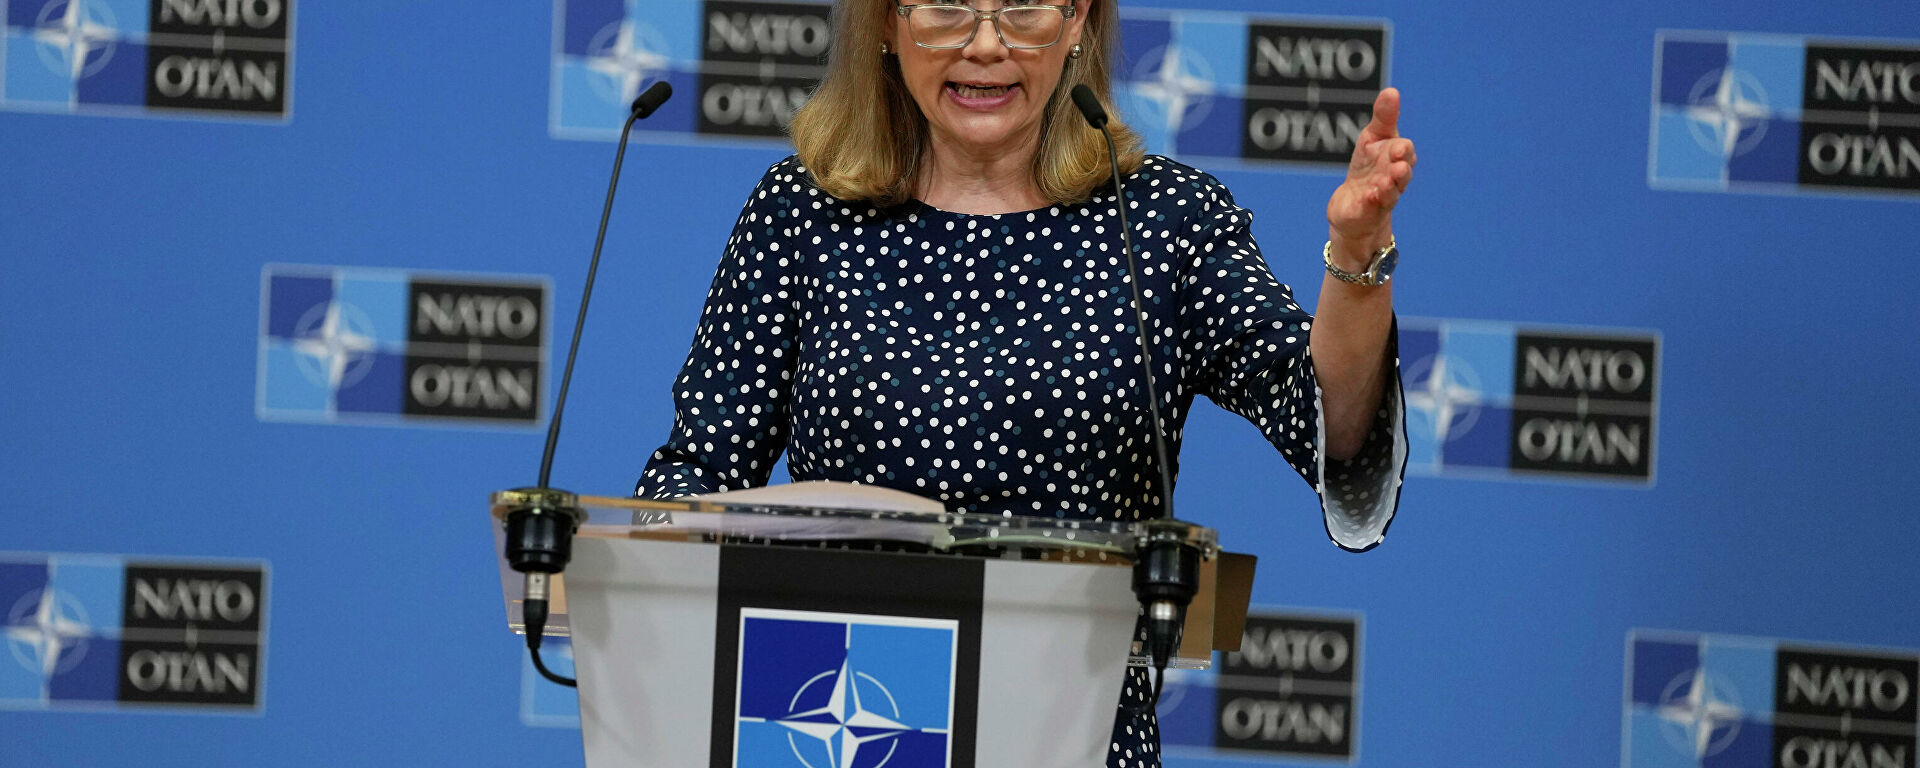 US Ambassador to NATO Julian Smith speaks during a press conference at NATO Headquarters in Brussels, Tuesday, February 15, 2022 - Sputnik Brazil, 1920, 02.15.2022